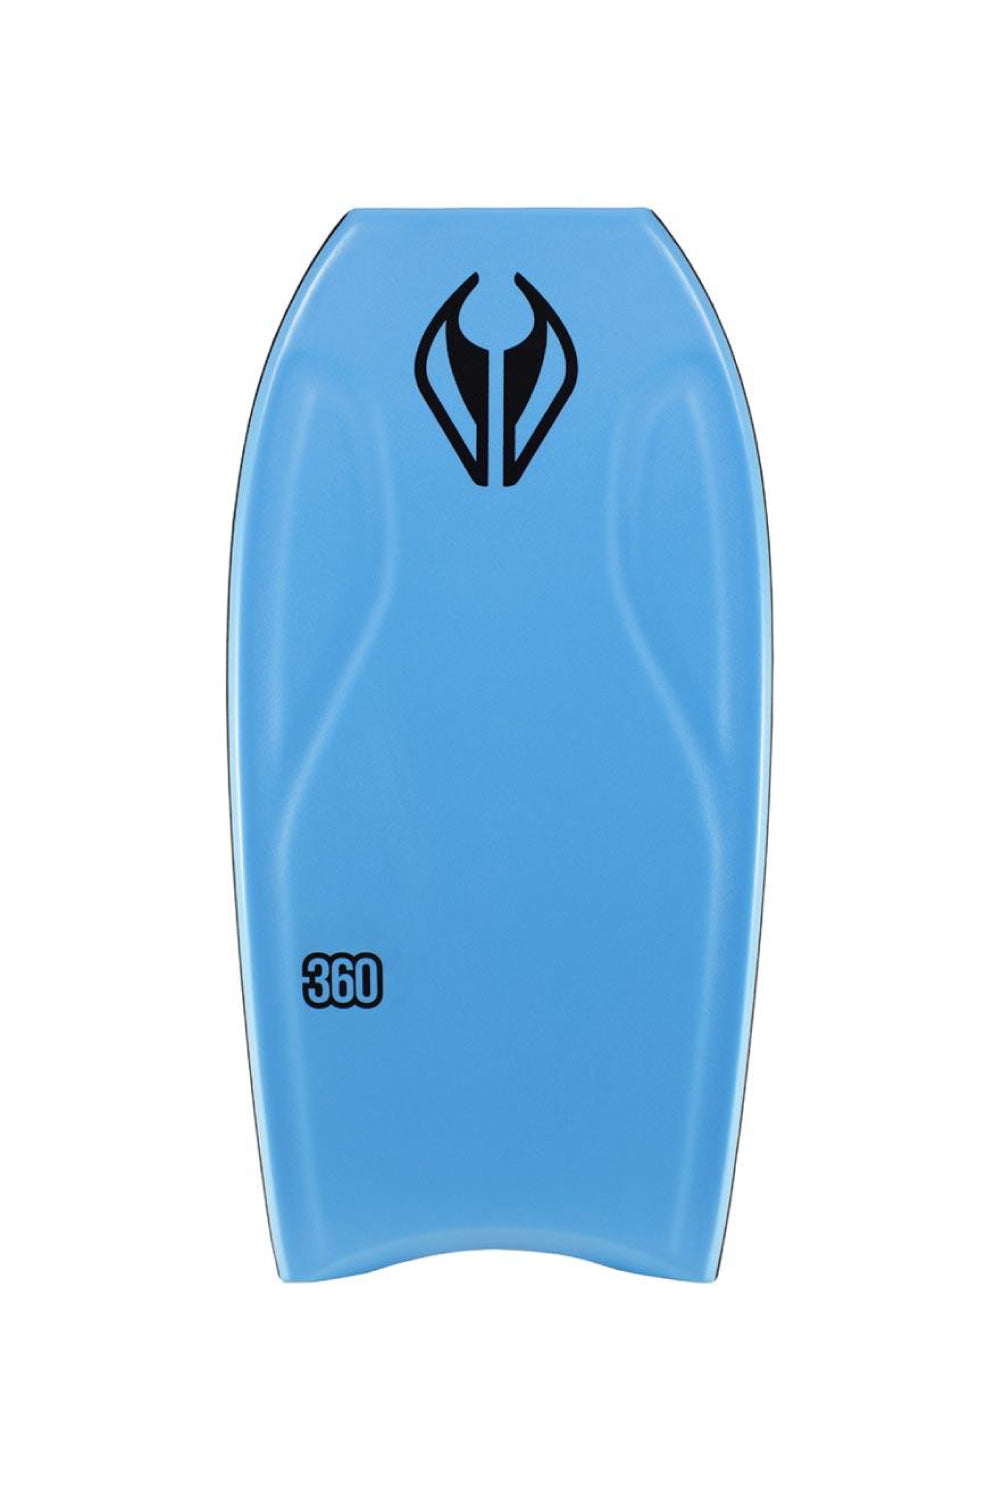 nmd 360 bodyboard review